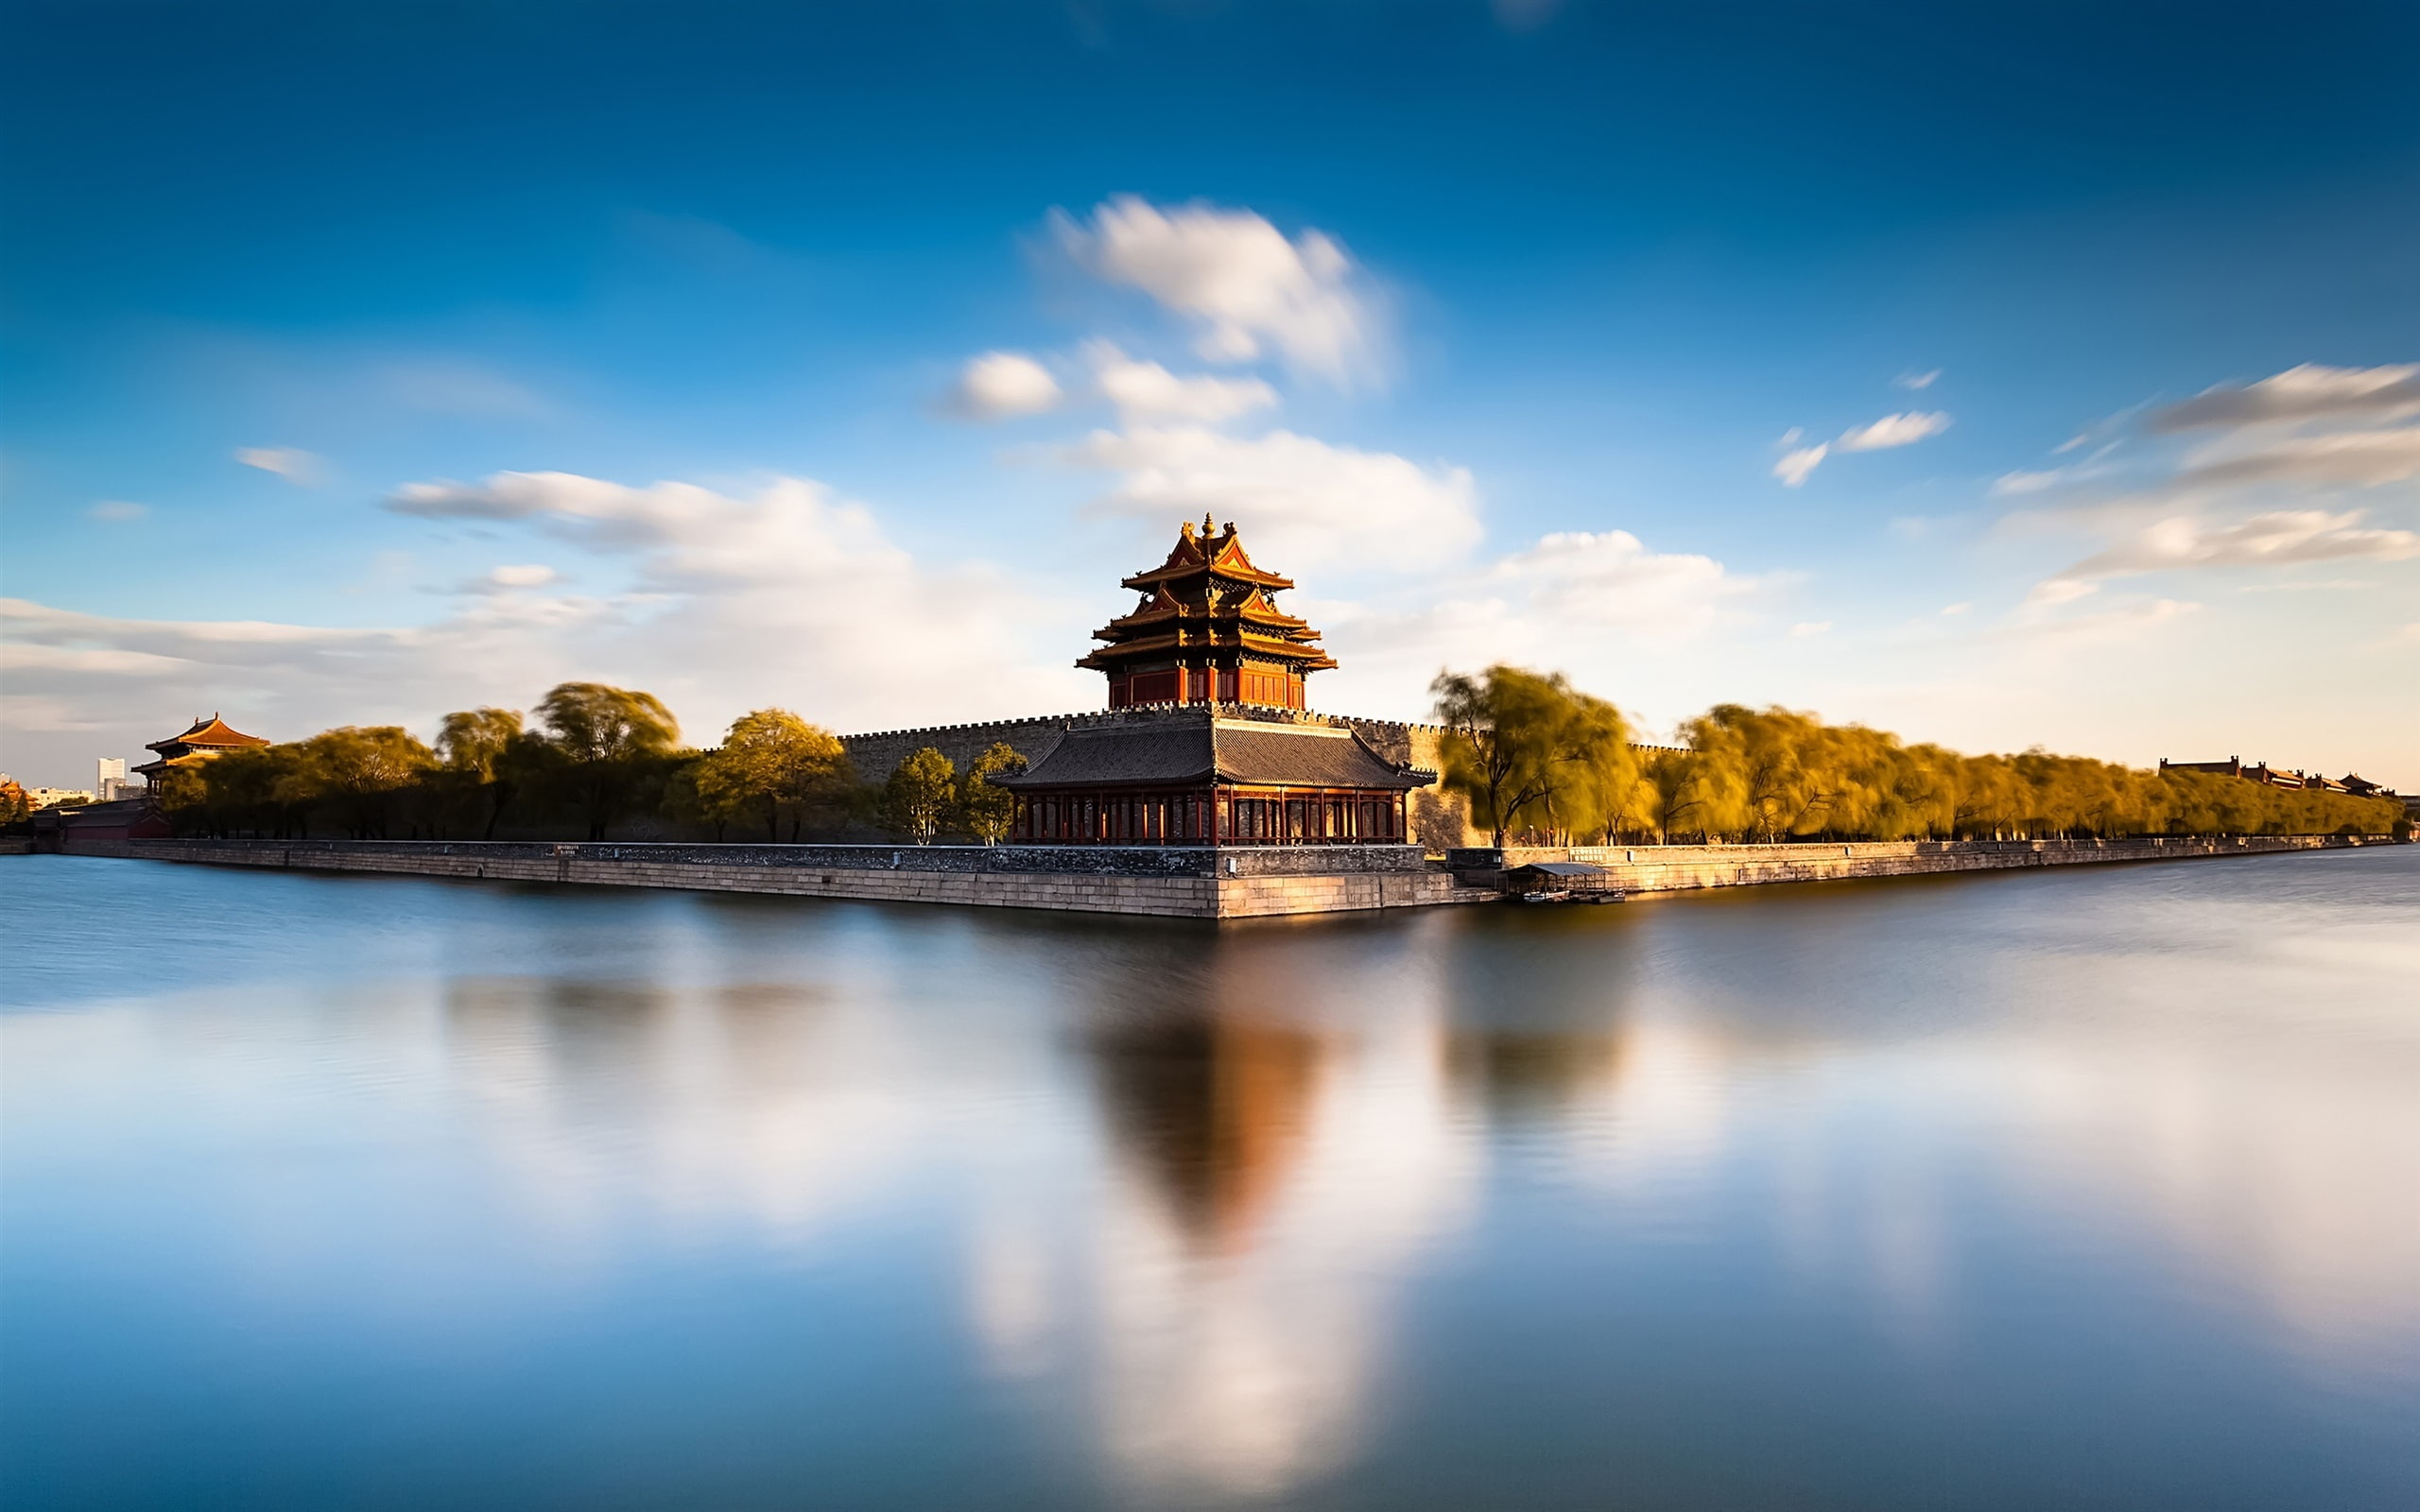 Beijing Forbidden City Moat, China, river, water reflection